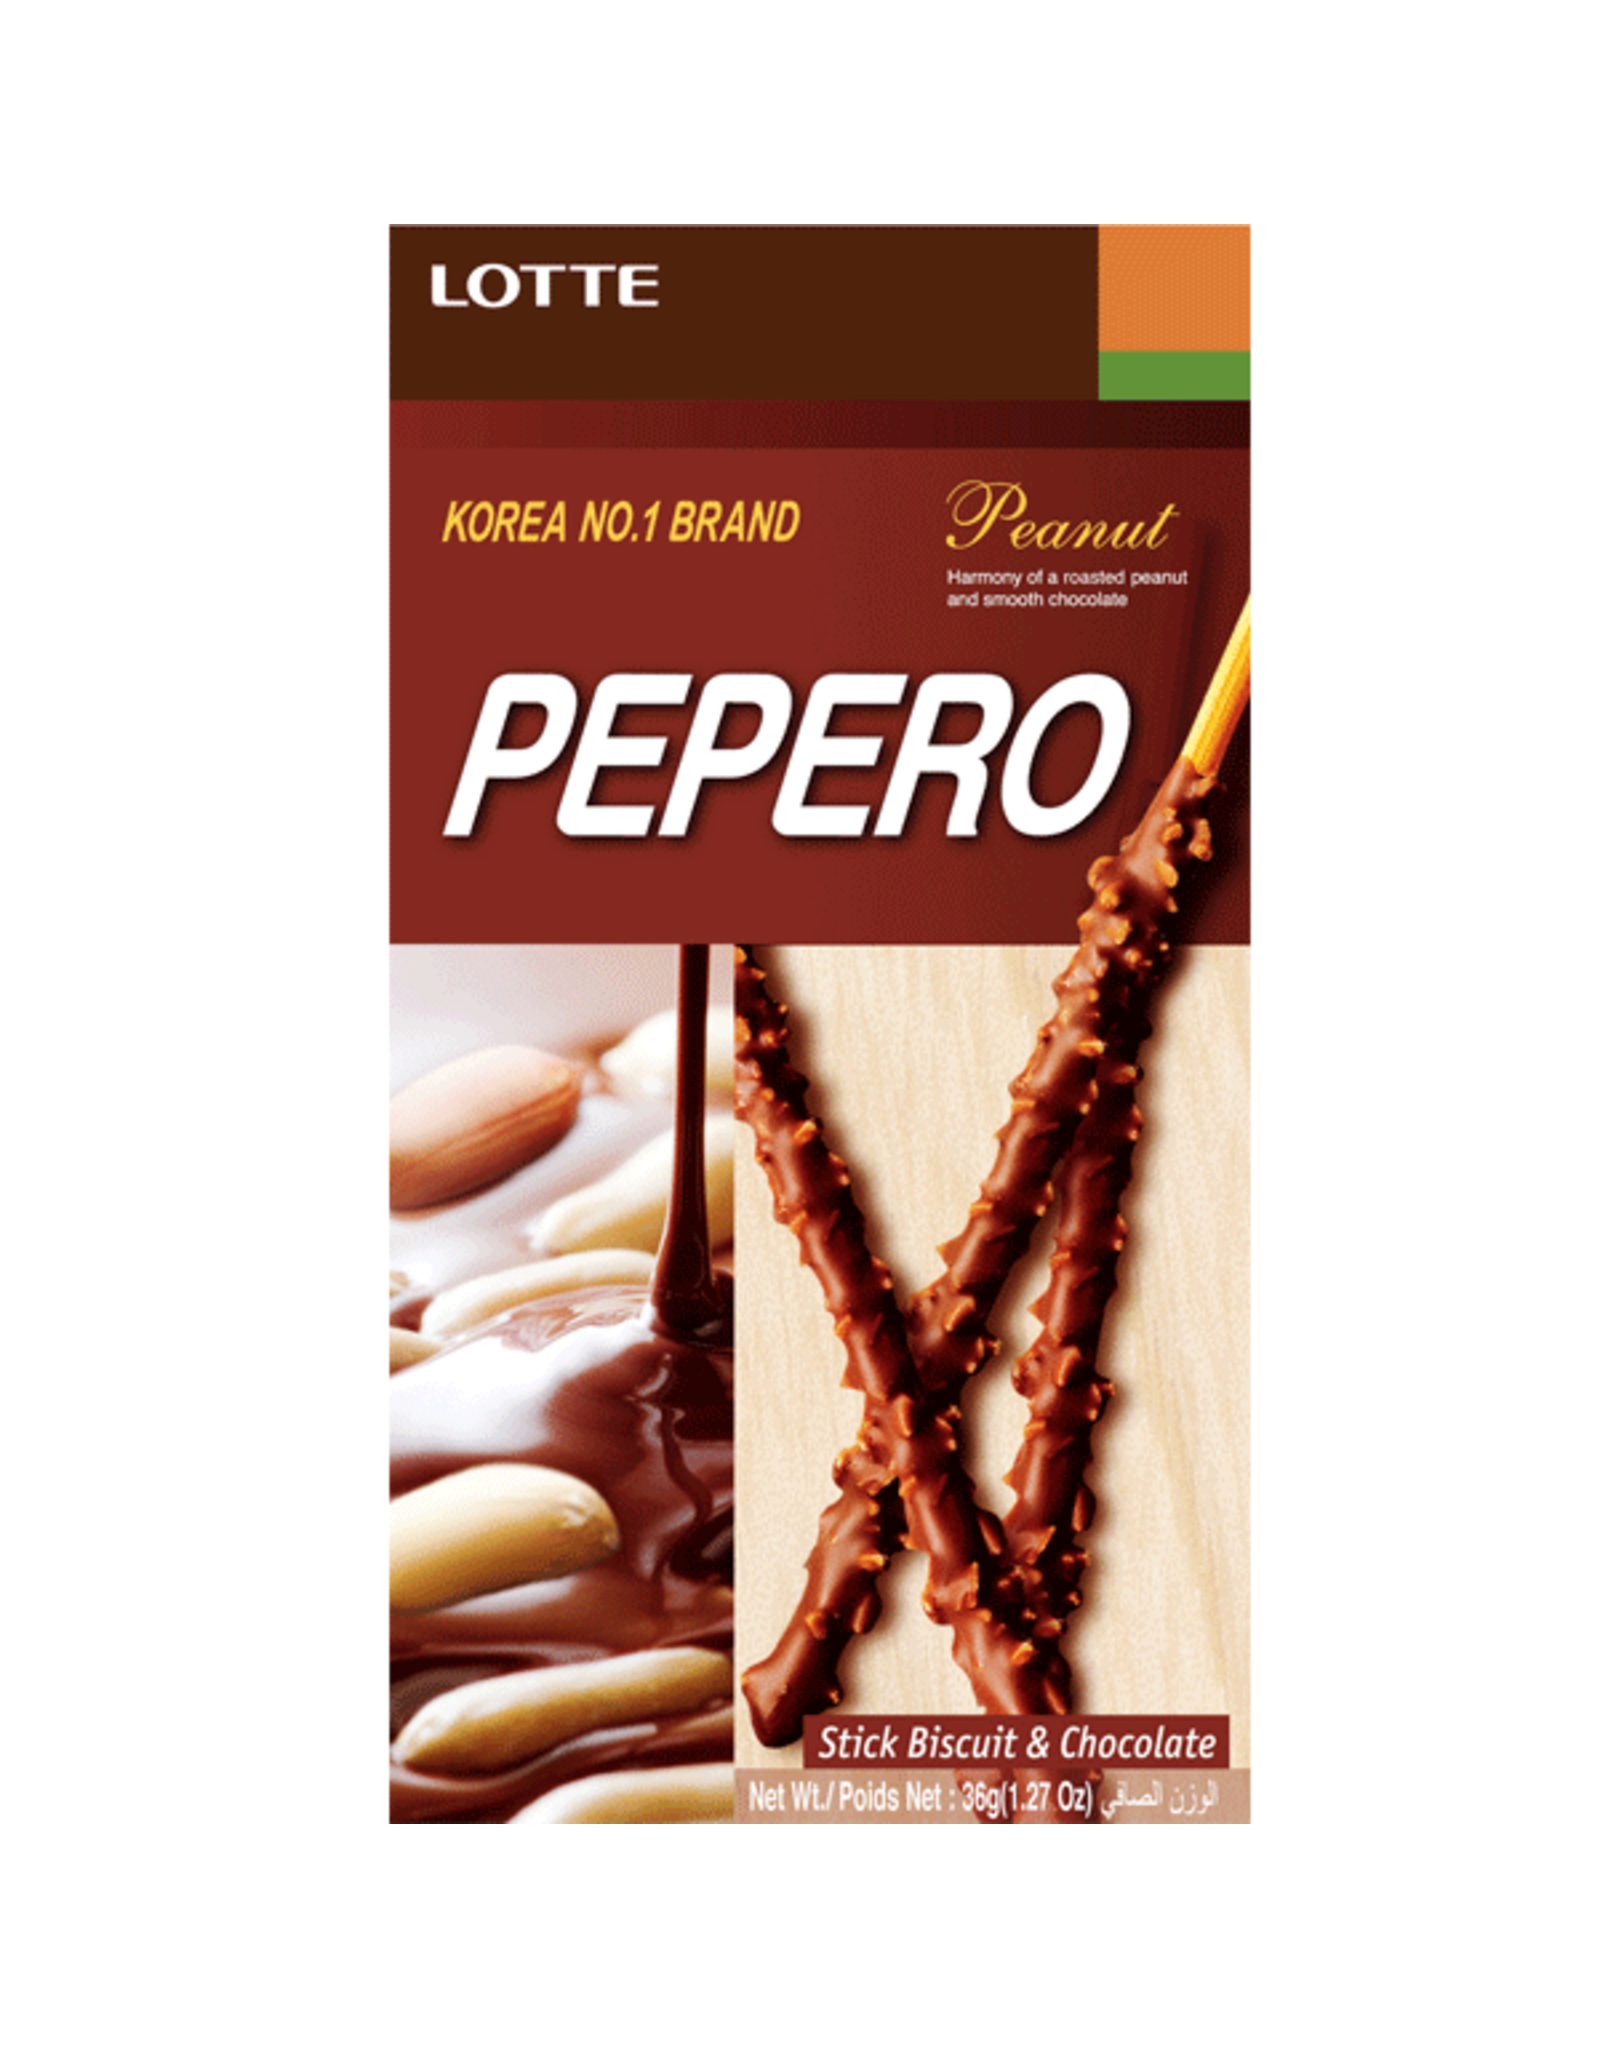 Pepero Chocolate & Biscuit - Peanut - 39 g - BBD: 20/04/2022